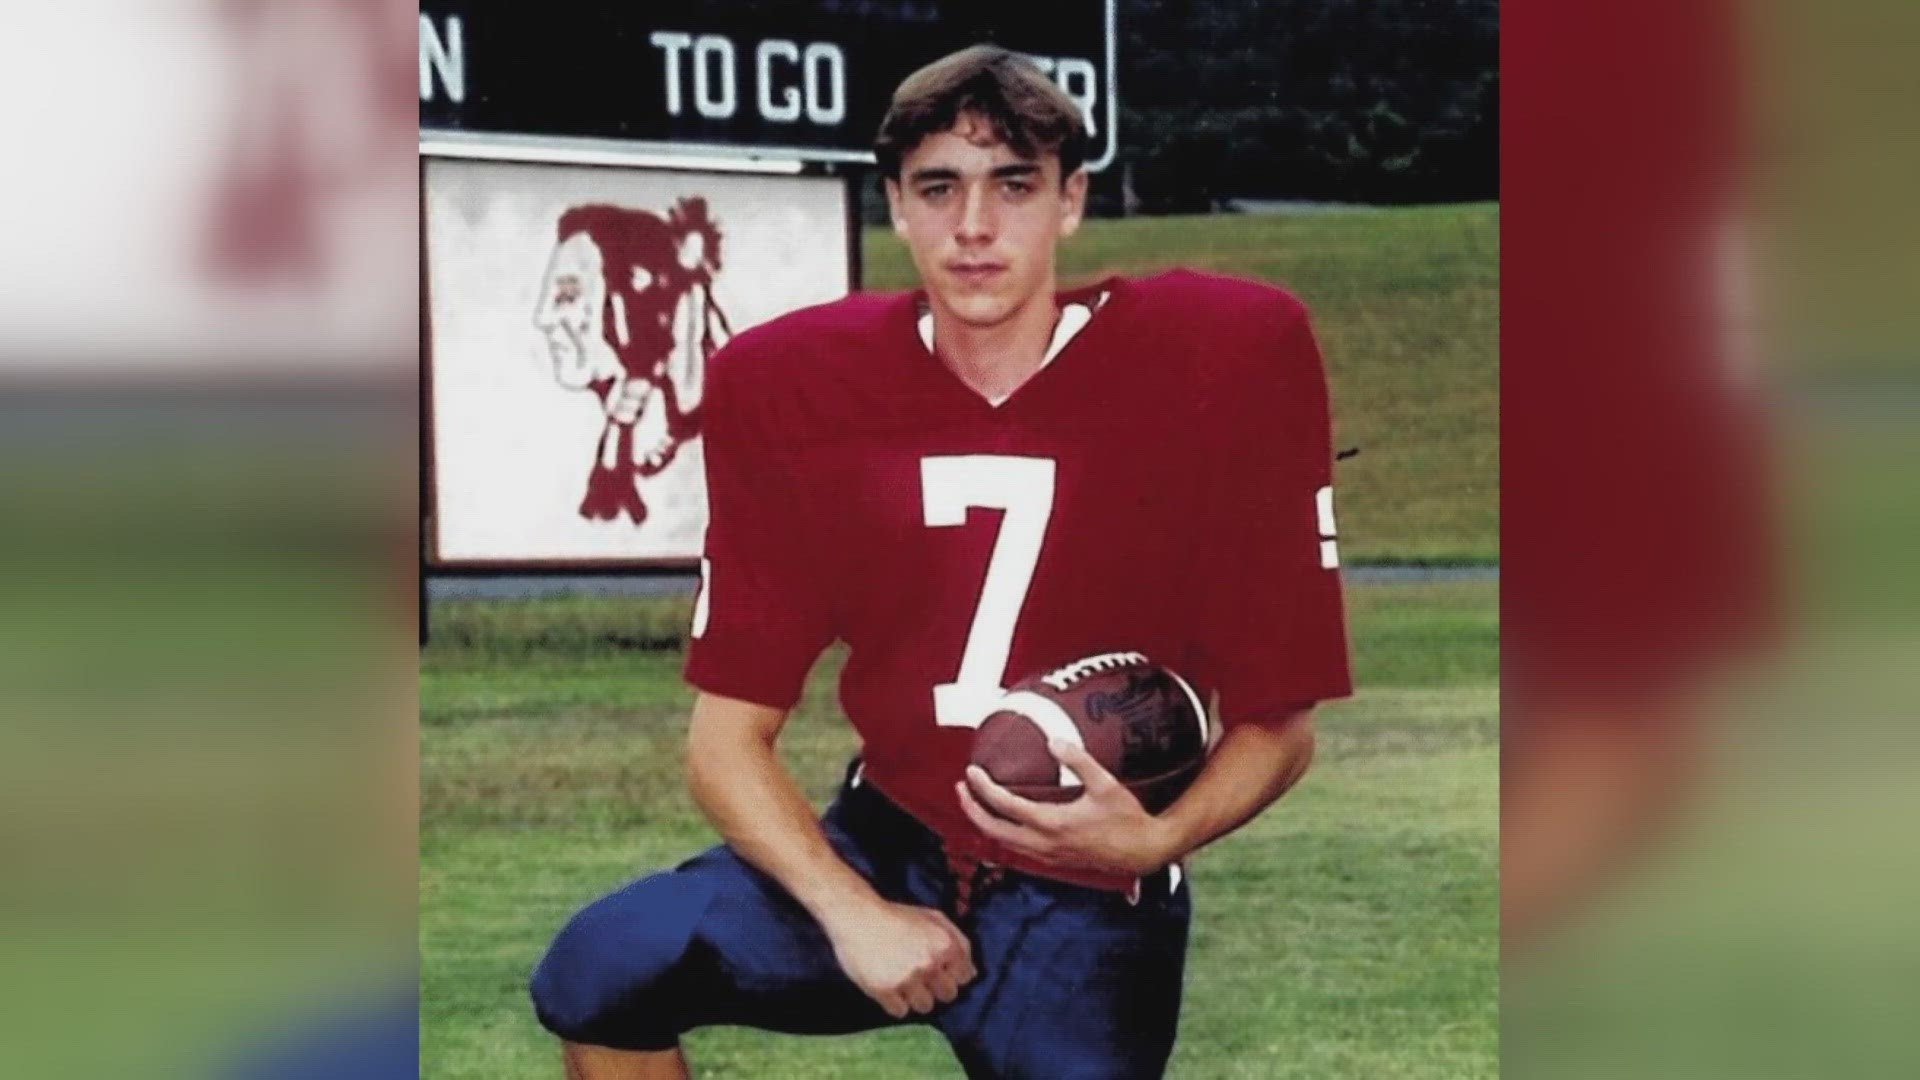 Witenbarger graduated from South Doyle in 1996, and was a four-sport athlete for the Cherokees, playing soccer, basketball, football and cross country.